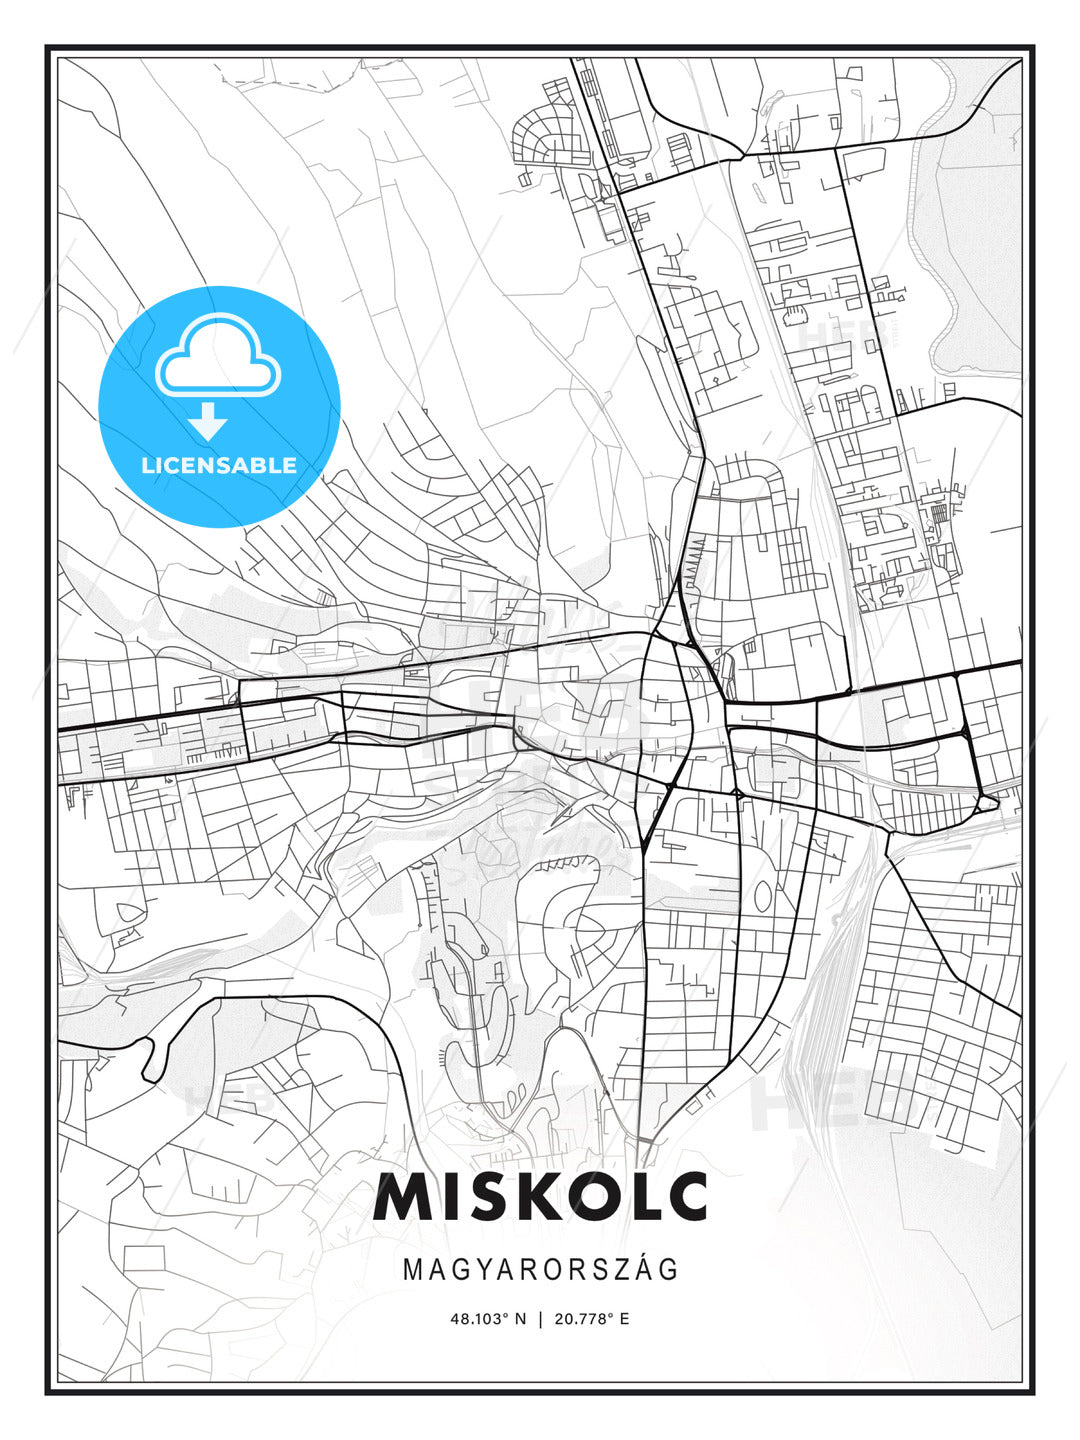 Miskolc, Hungary, Modern Print Template in Various Formats - HEBSTREITS Sketches